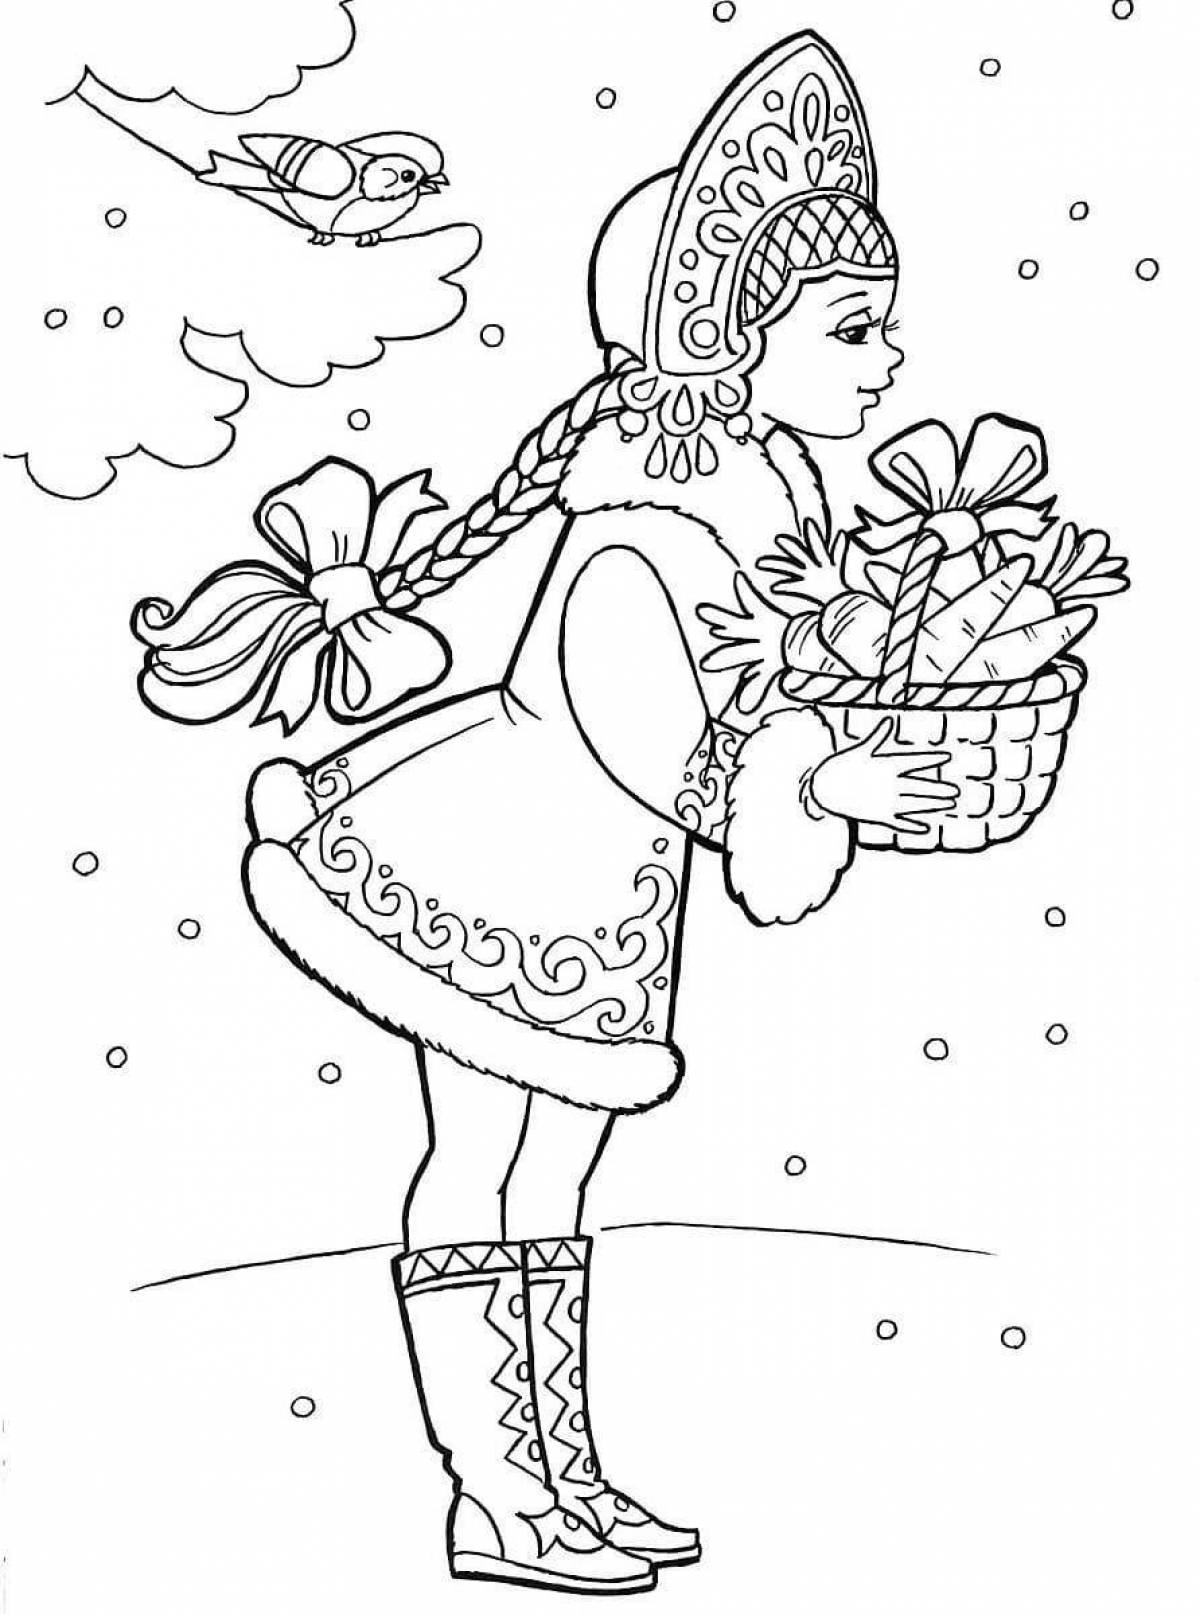 Snow Maiden coloring page